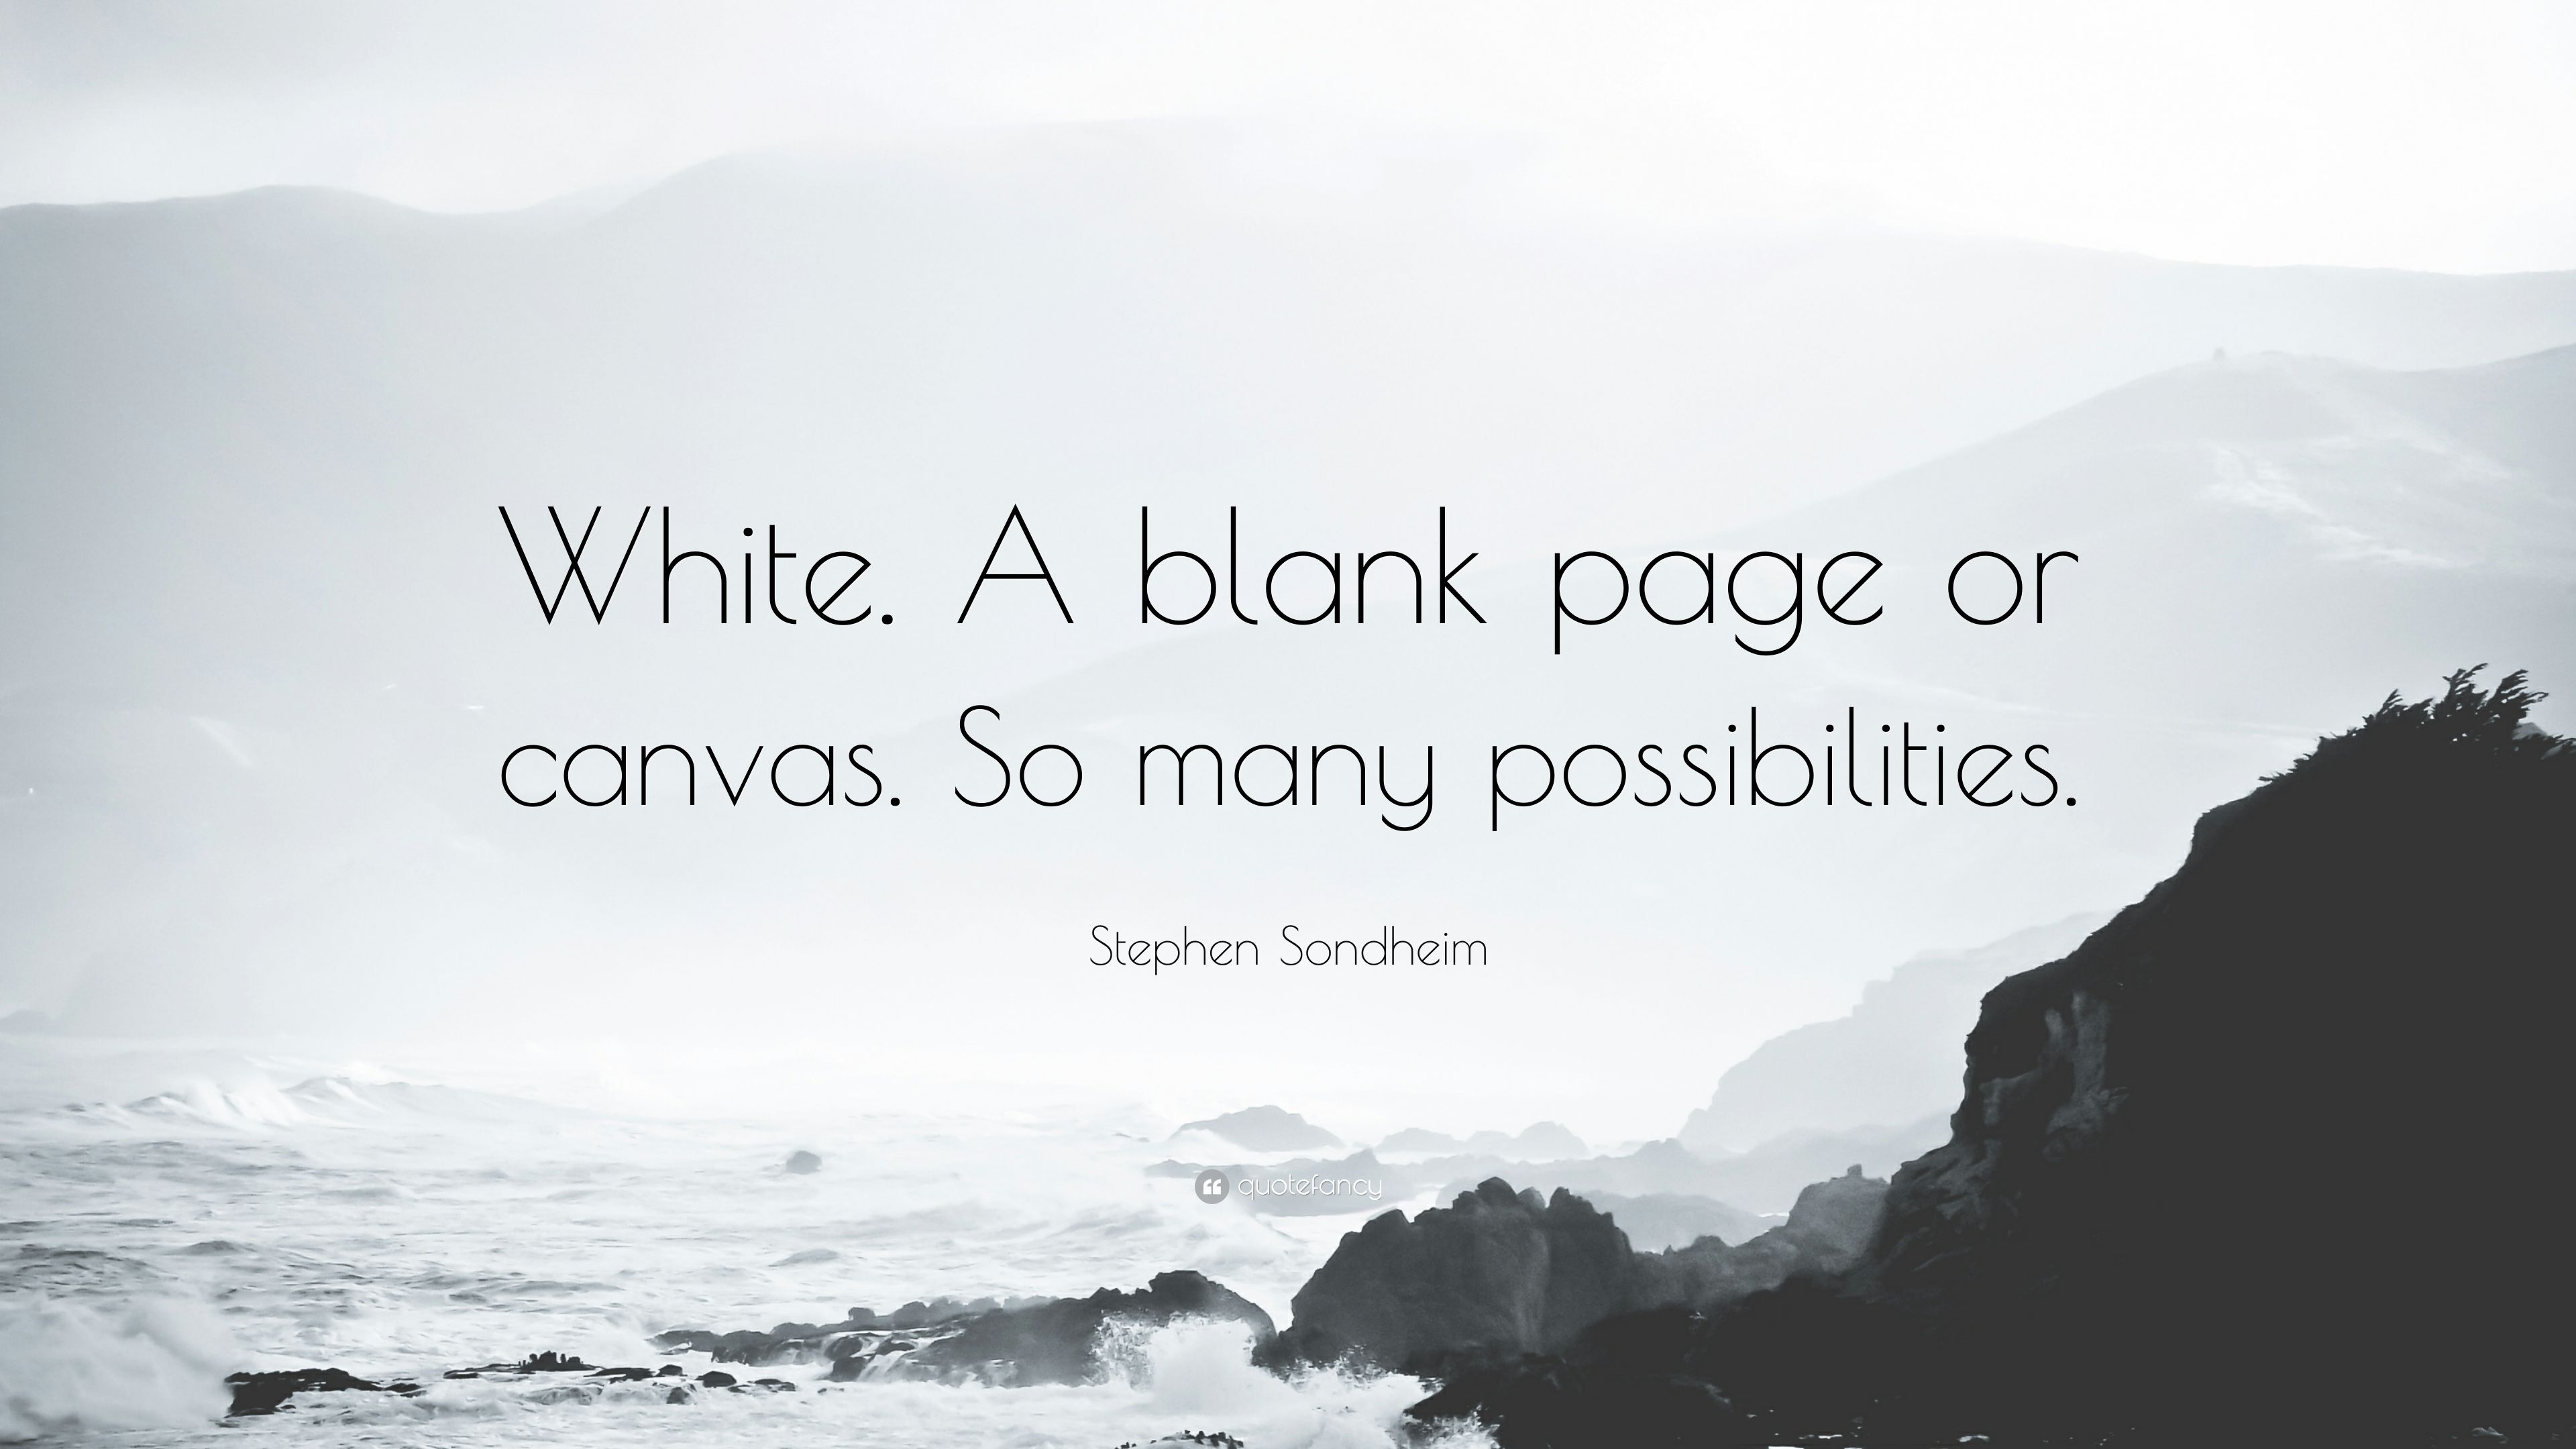 Stephen Sondheim Quote: “White. A blank page or canvas. So many